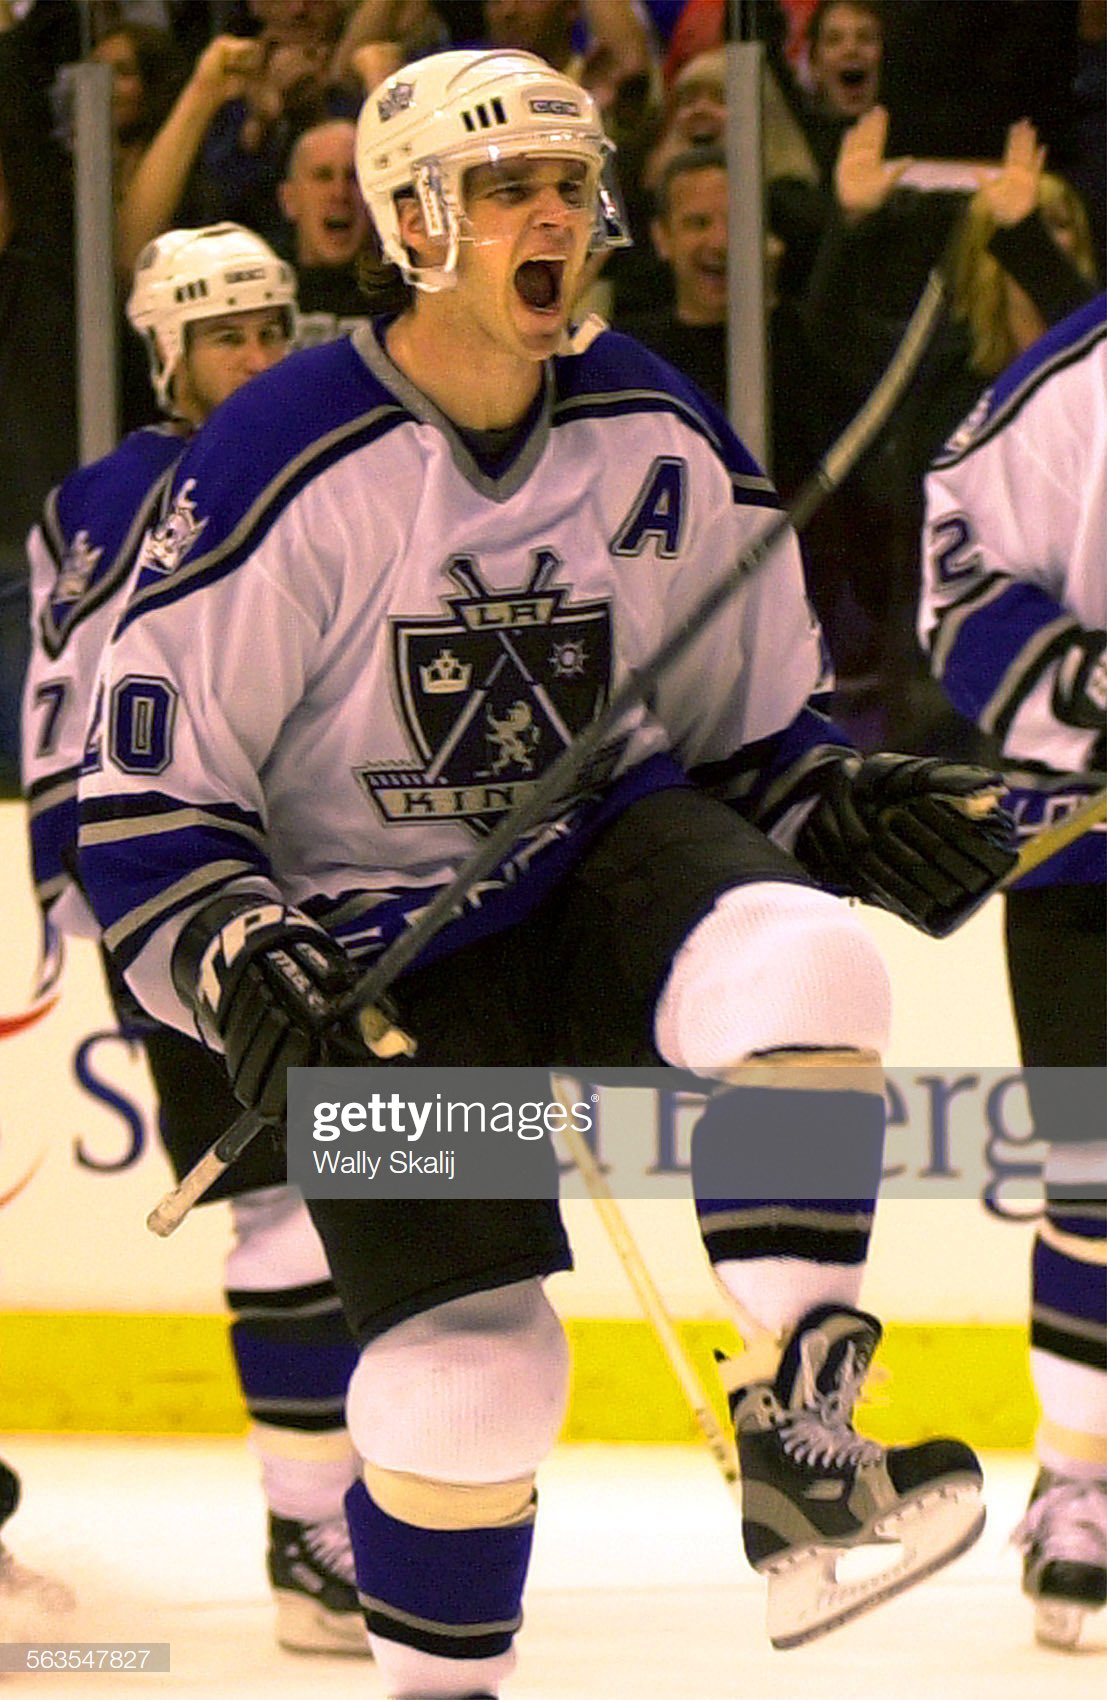 Happy birthday to legend Luc Robitaille, who was born on February 17, 1966.  